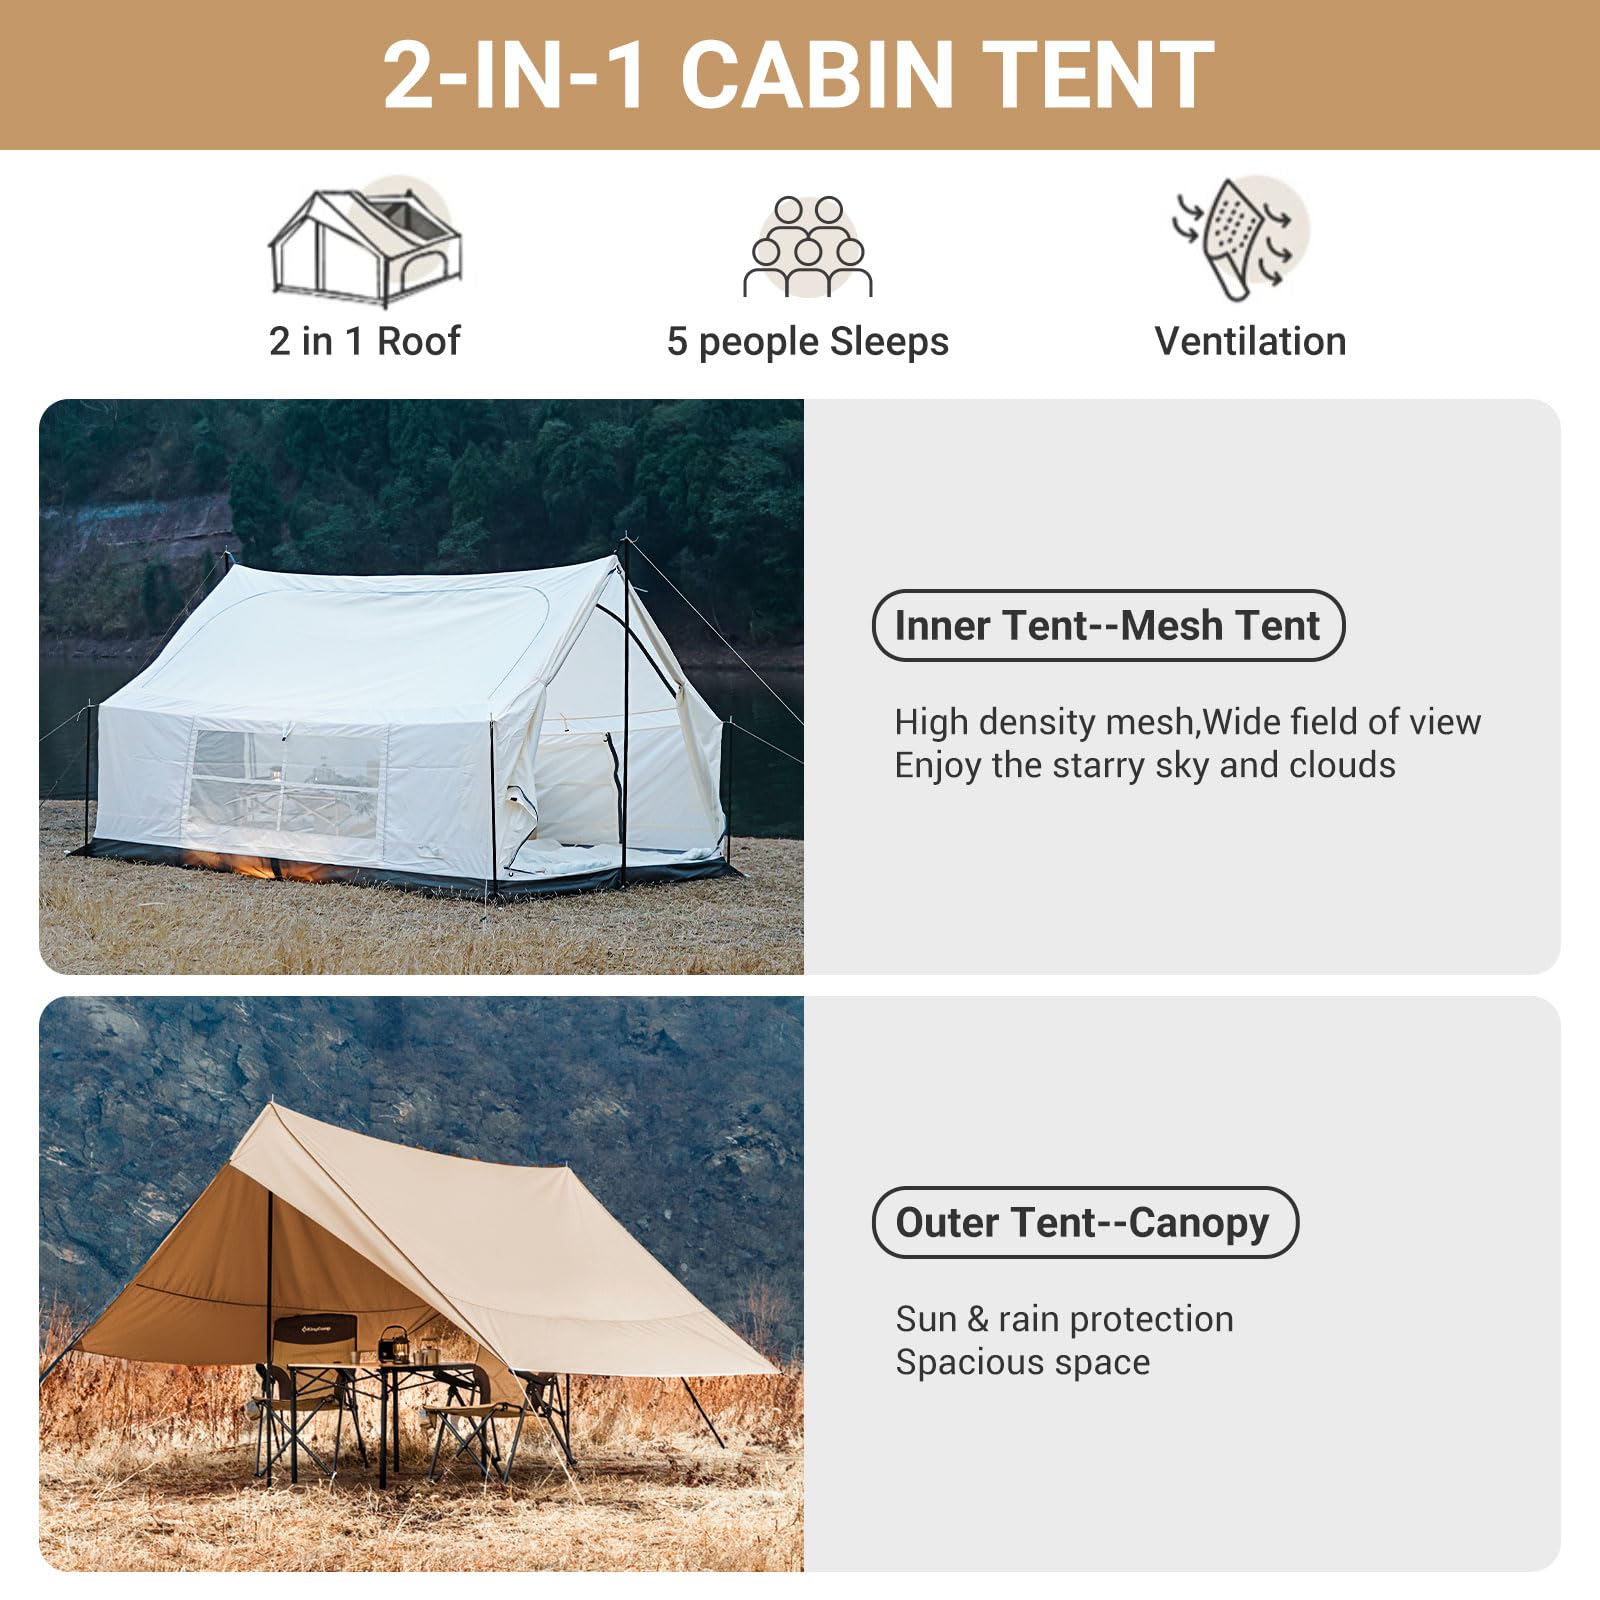 family camping tent